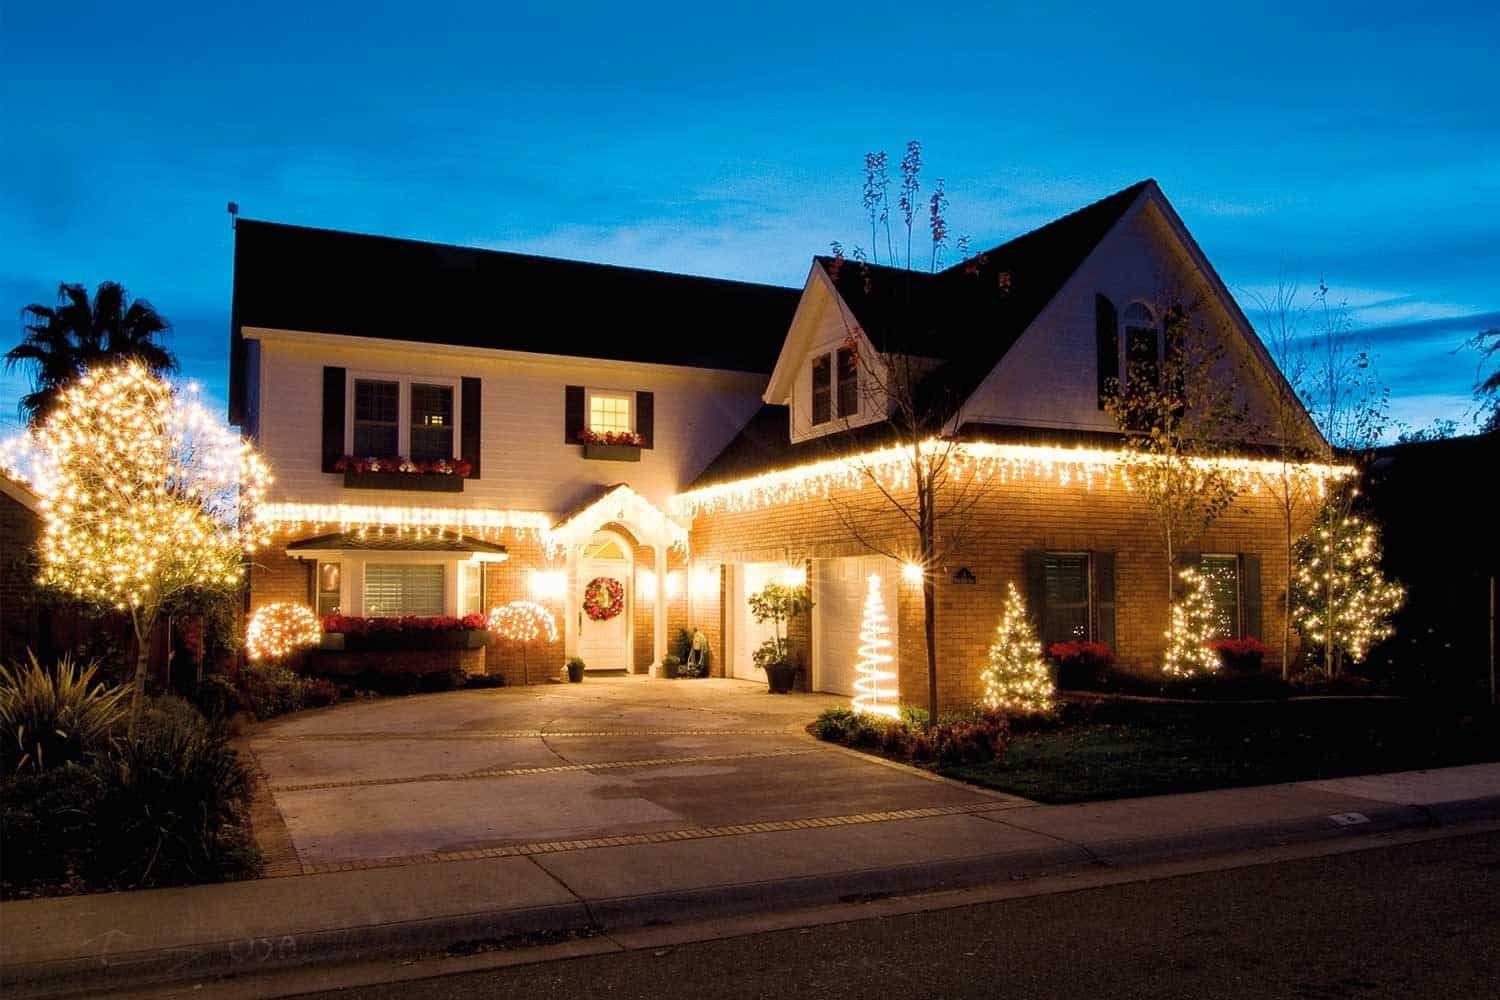 Best Ways to Decorate Your Australian Home with Christmas Lights in 2020